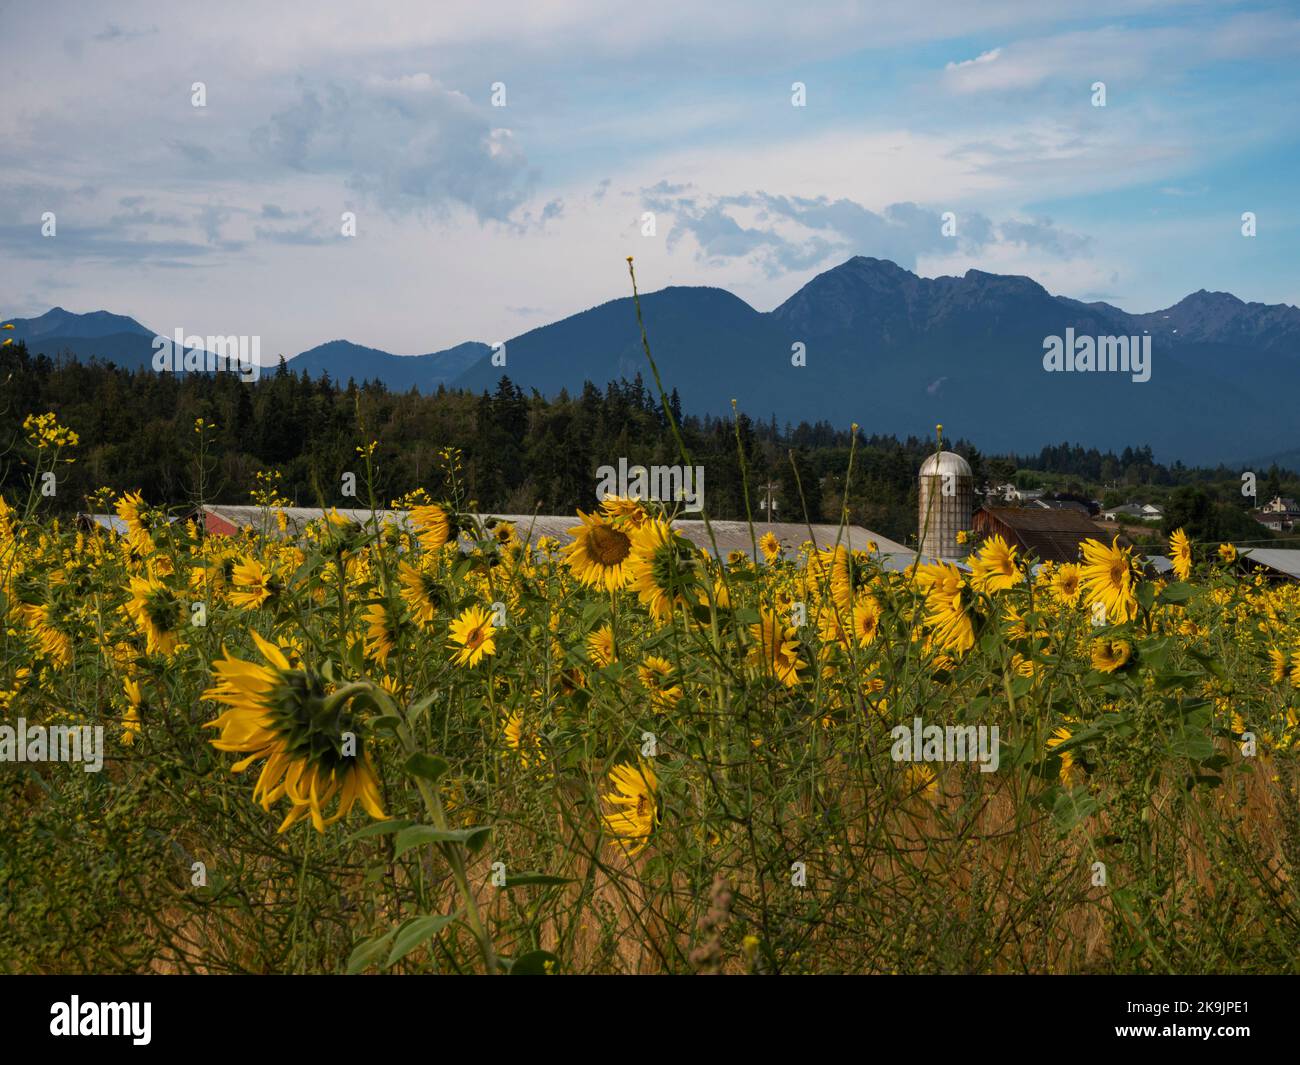 WA22643-00...WASHINGTON - A commercial field of sunflowers in Sequim. Stock Photo